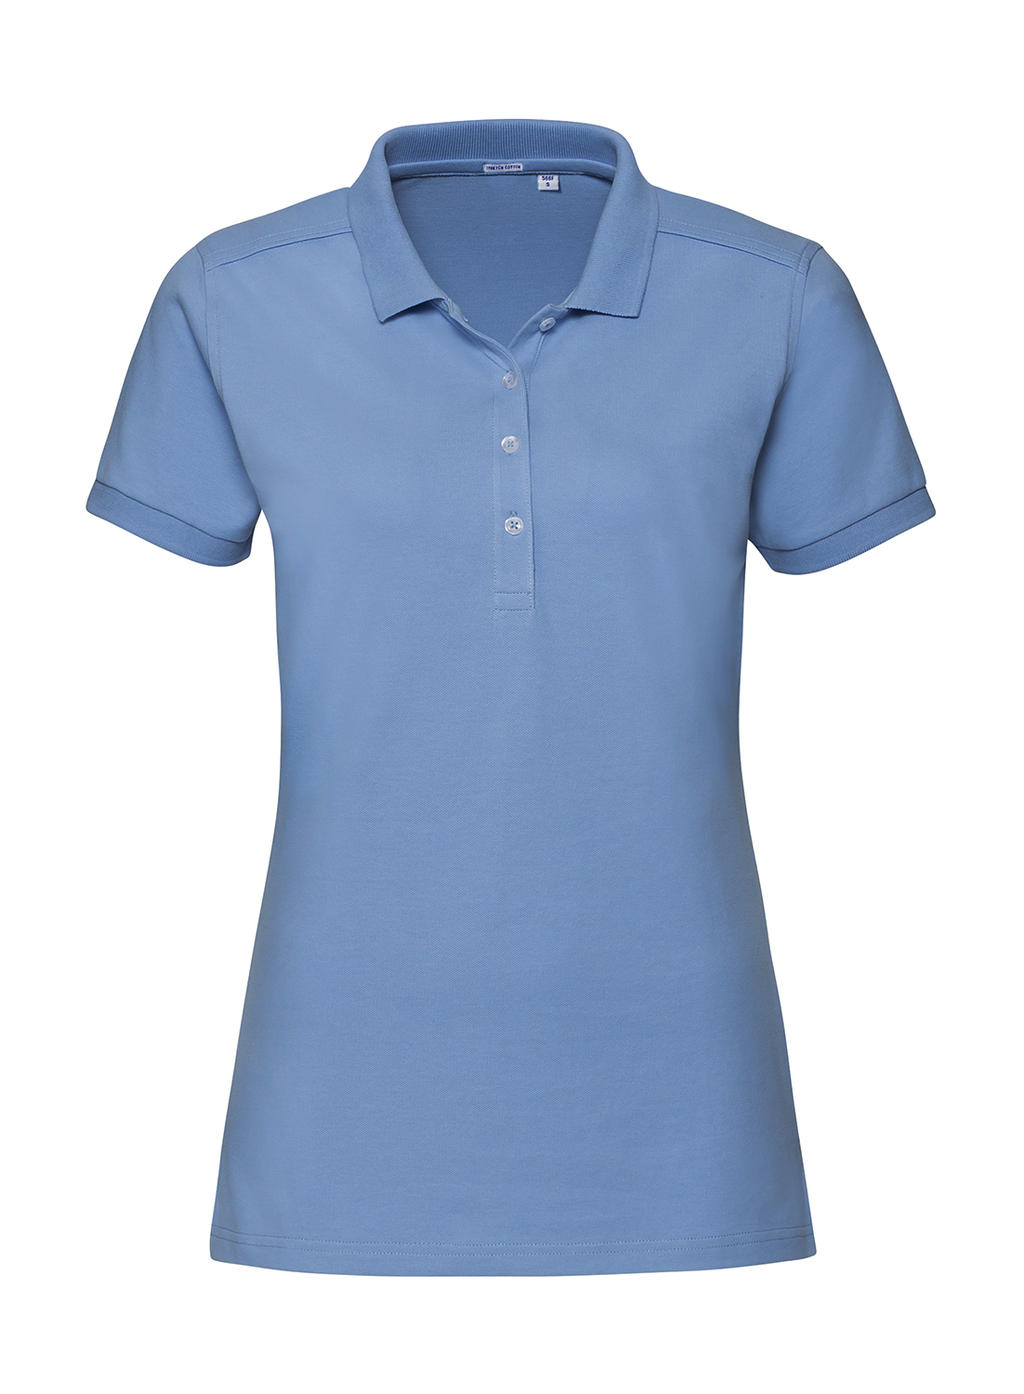  Ladies Fitted Stretch Polo in Farbe Sky